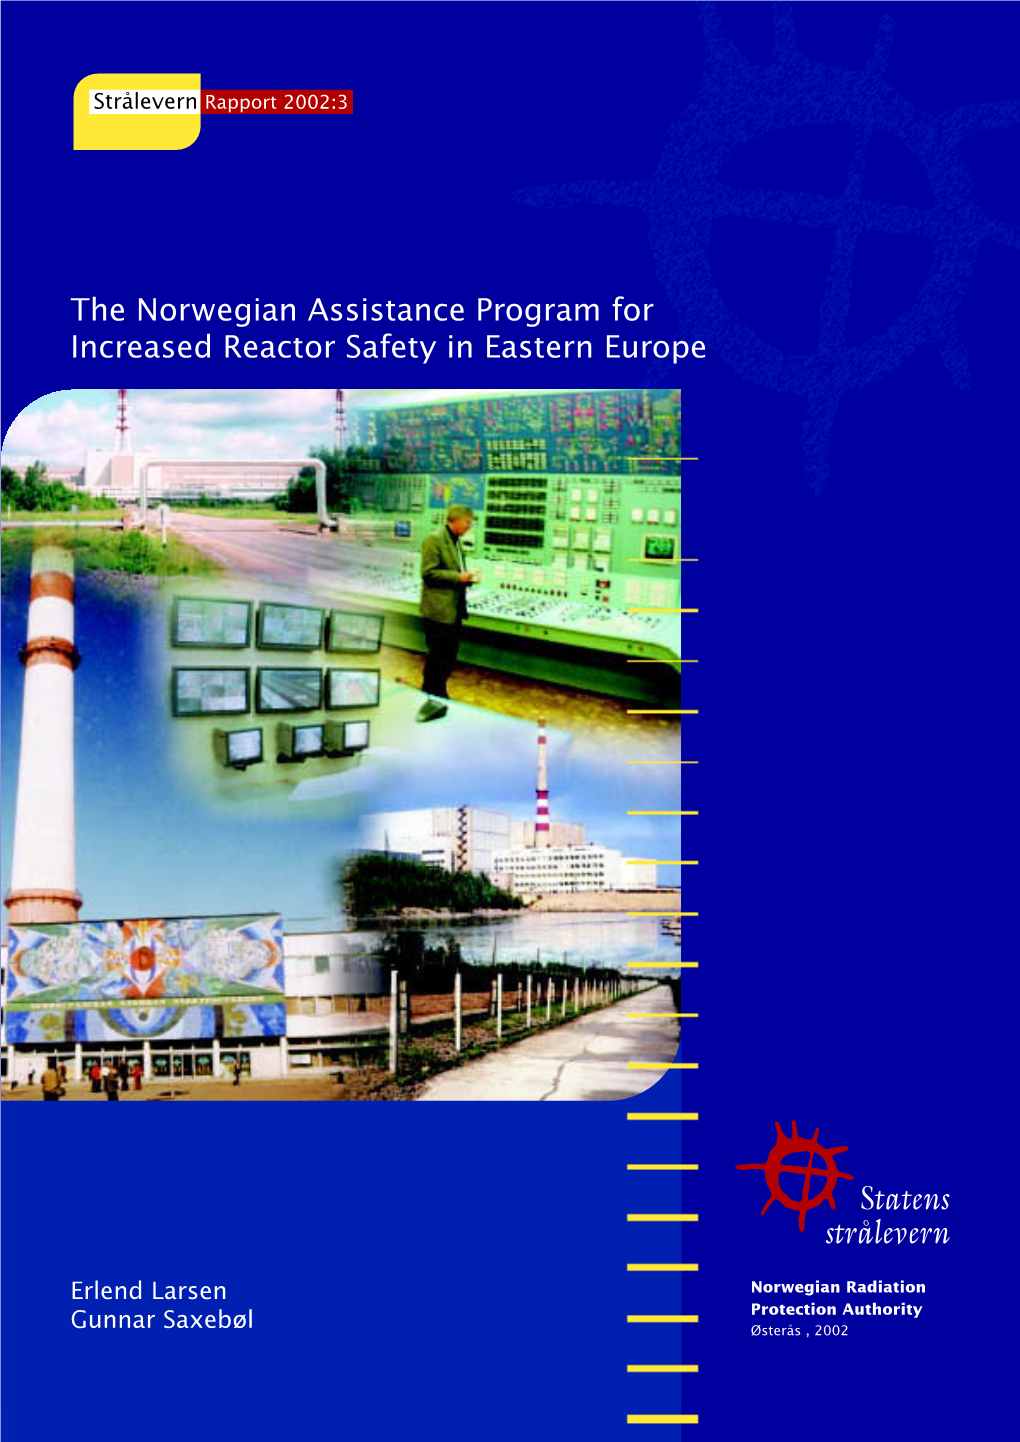 The Norwegian Assistance Program for Increased Reactor Safety in Eastern Europe